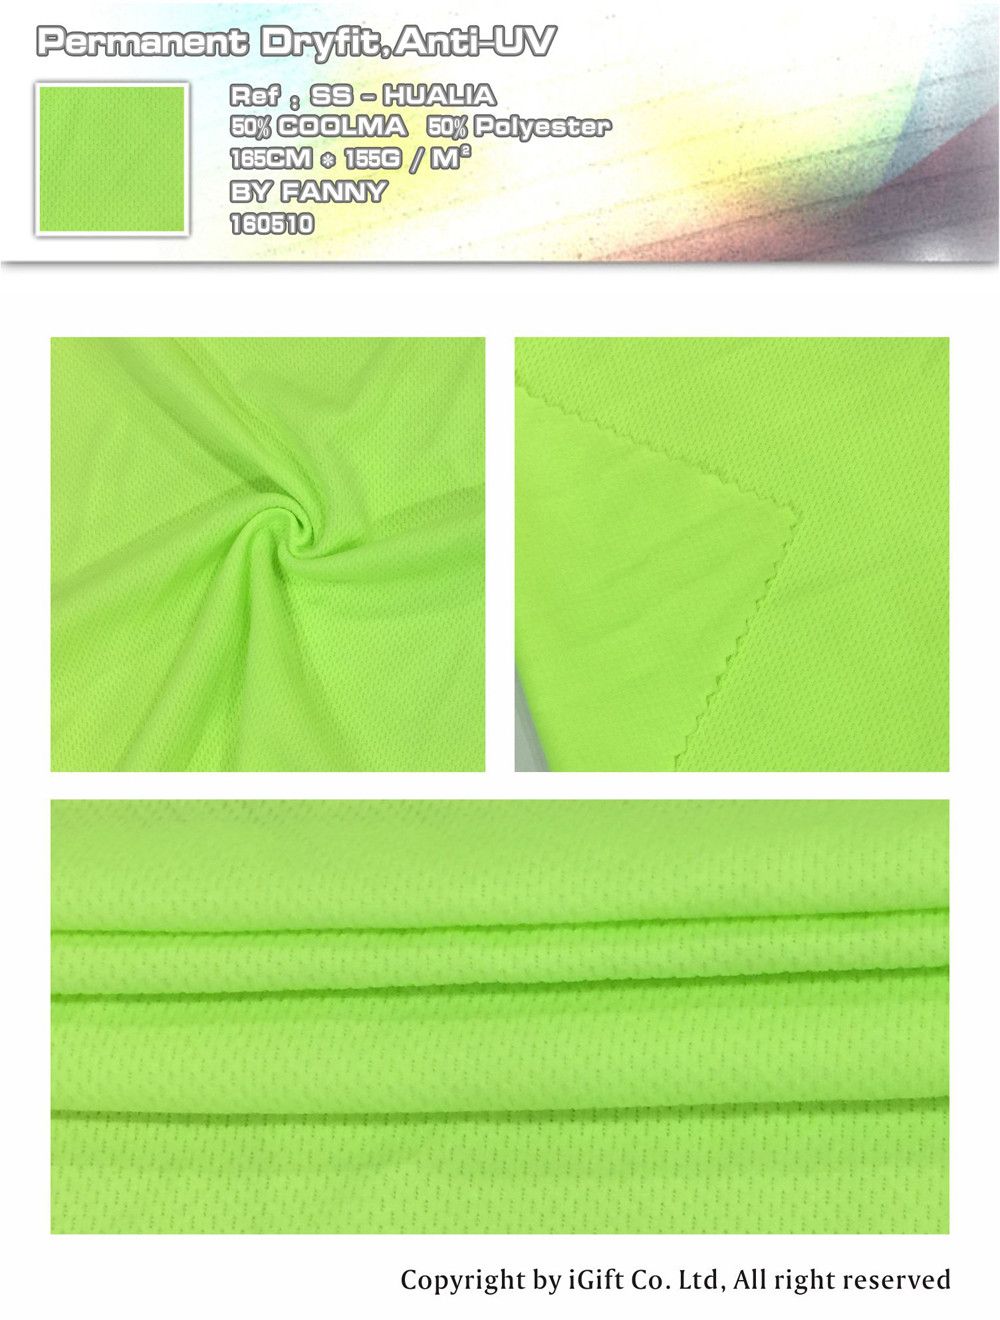 Permanent Dryfit,Anit-UV  Ref:SS-HUALIA    50％ COOLMA   50％Polyester    165CM*155G/M²   BY  FANNY   160510